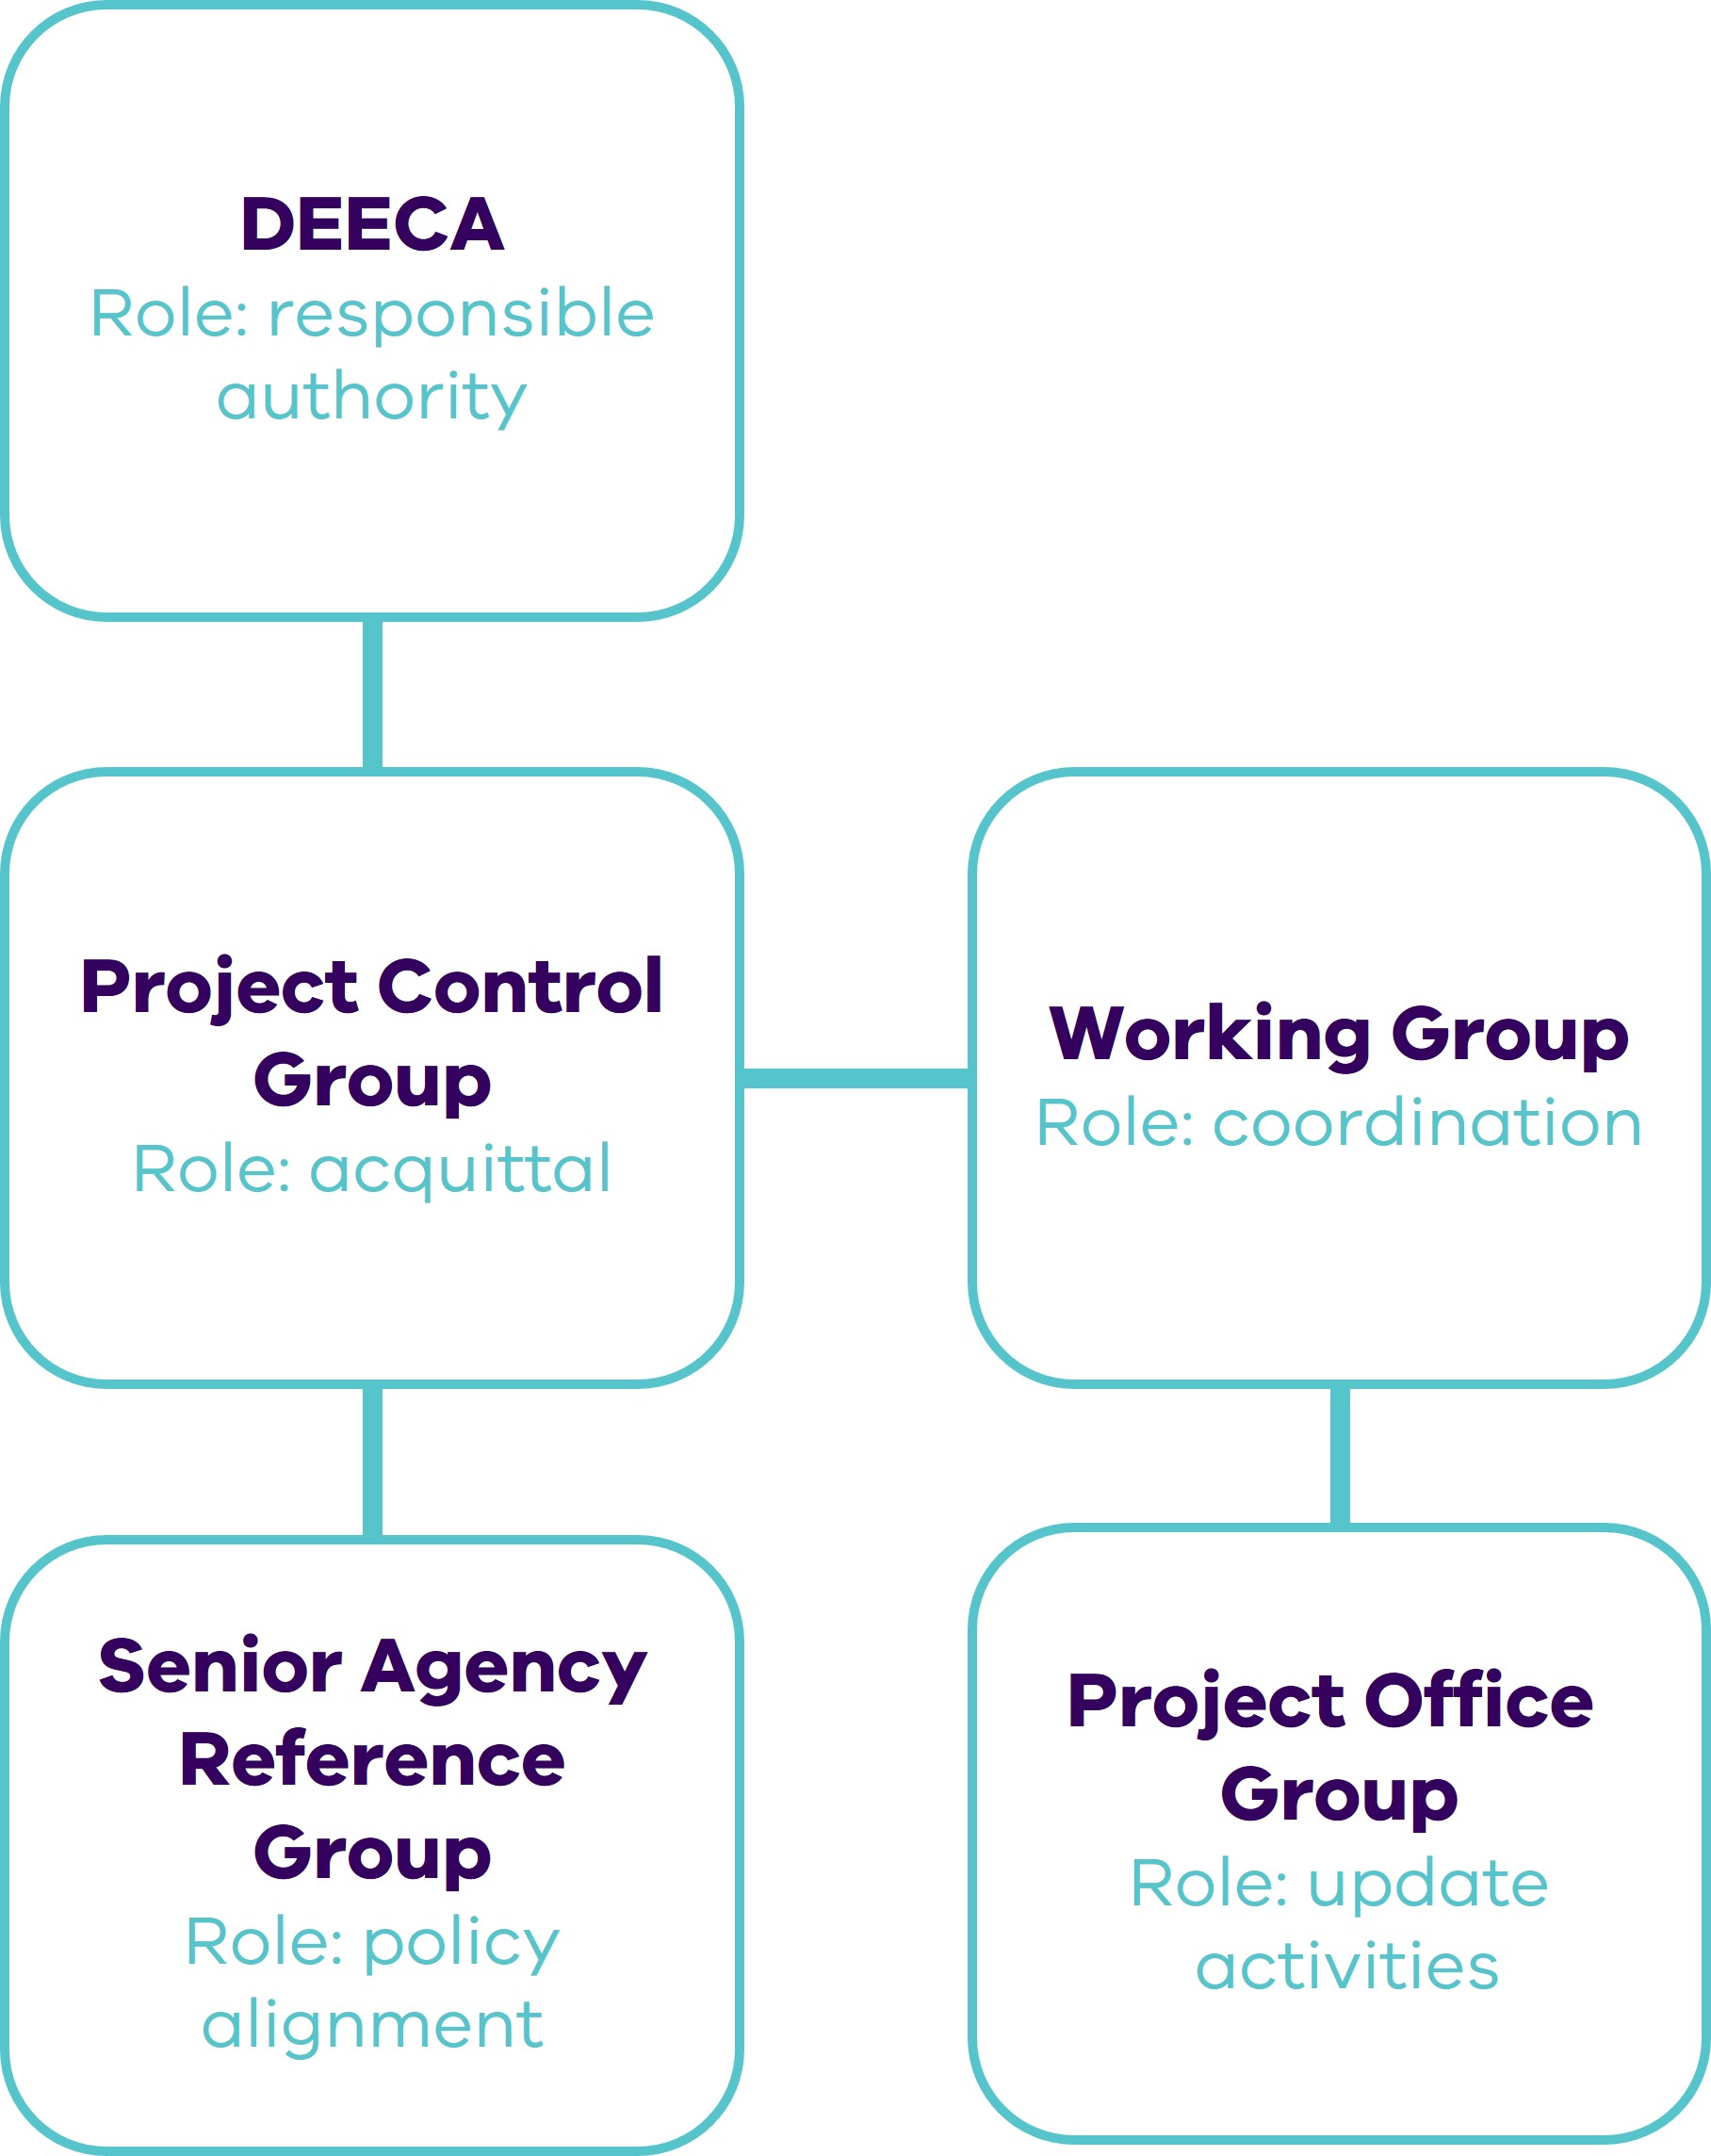 Image shows EMP governance groups and the links between them